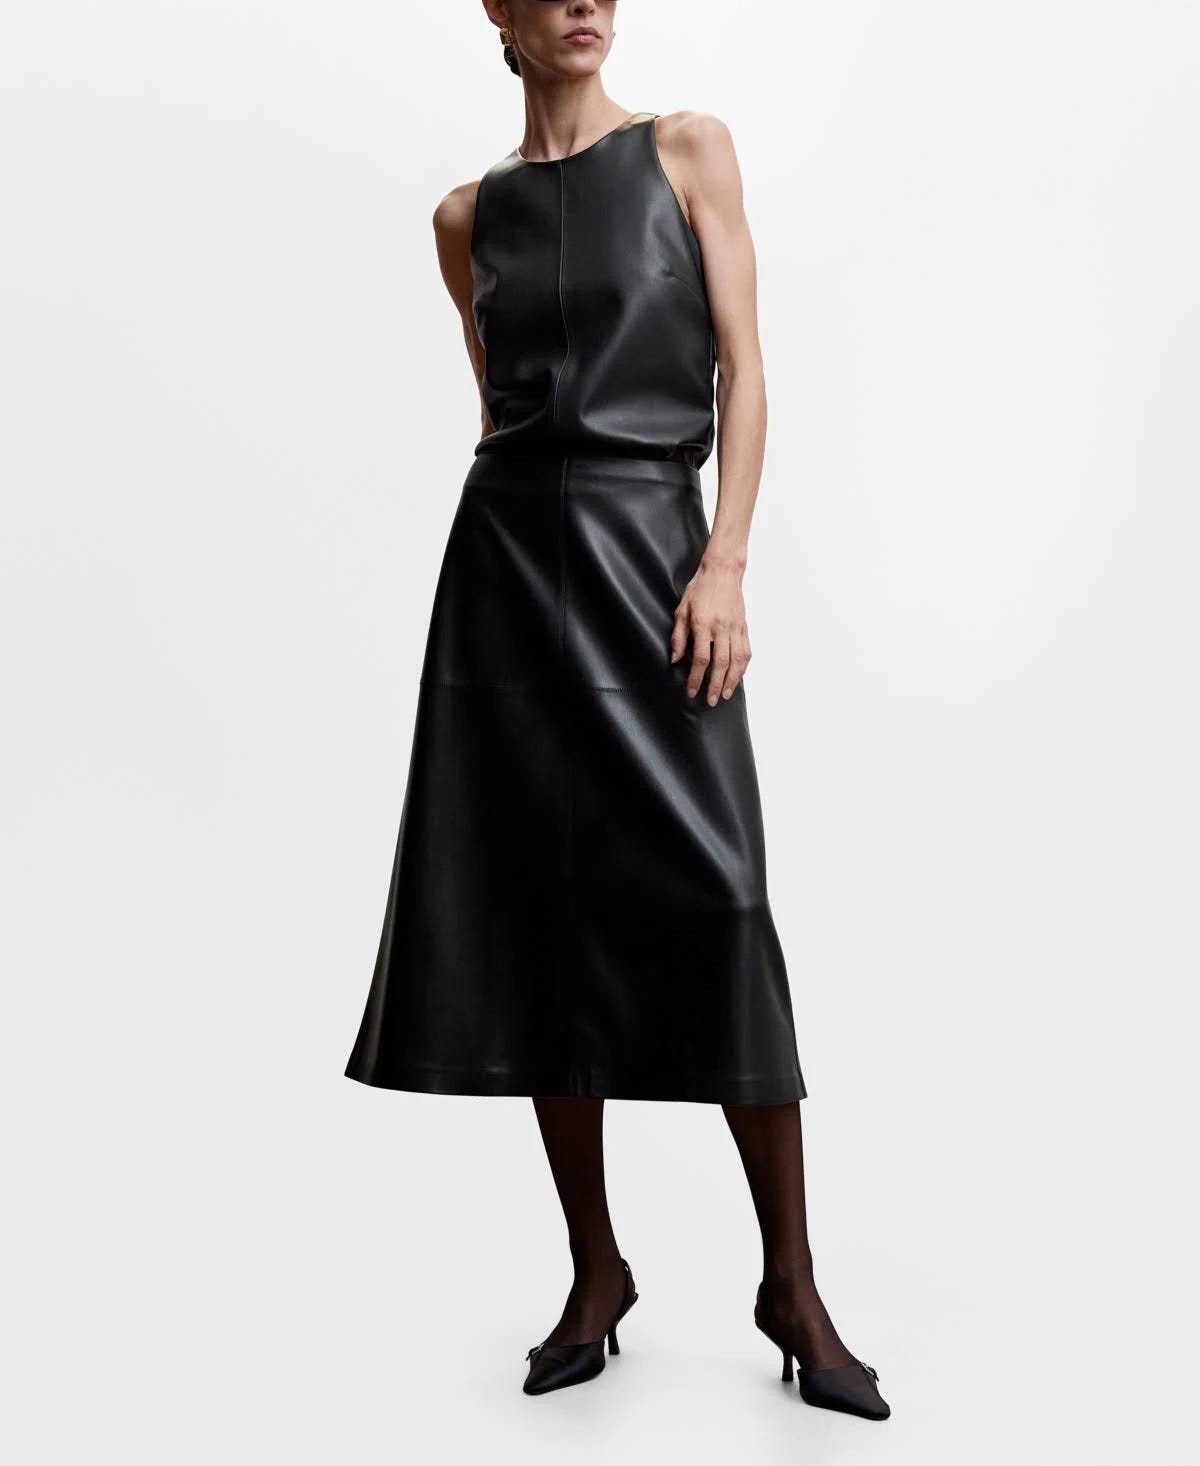 High-Waisted Faux-Leather Skirt in Black by Mango | Image